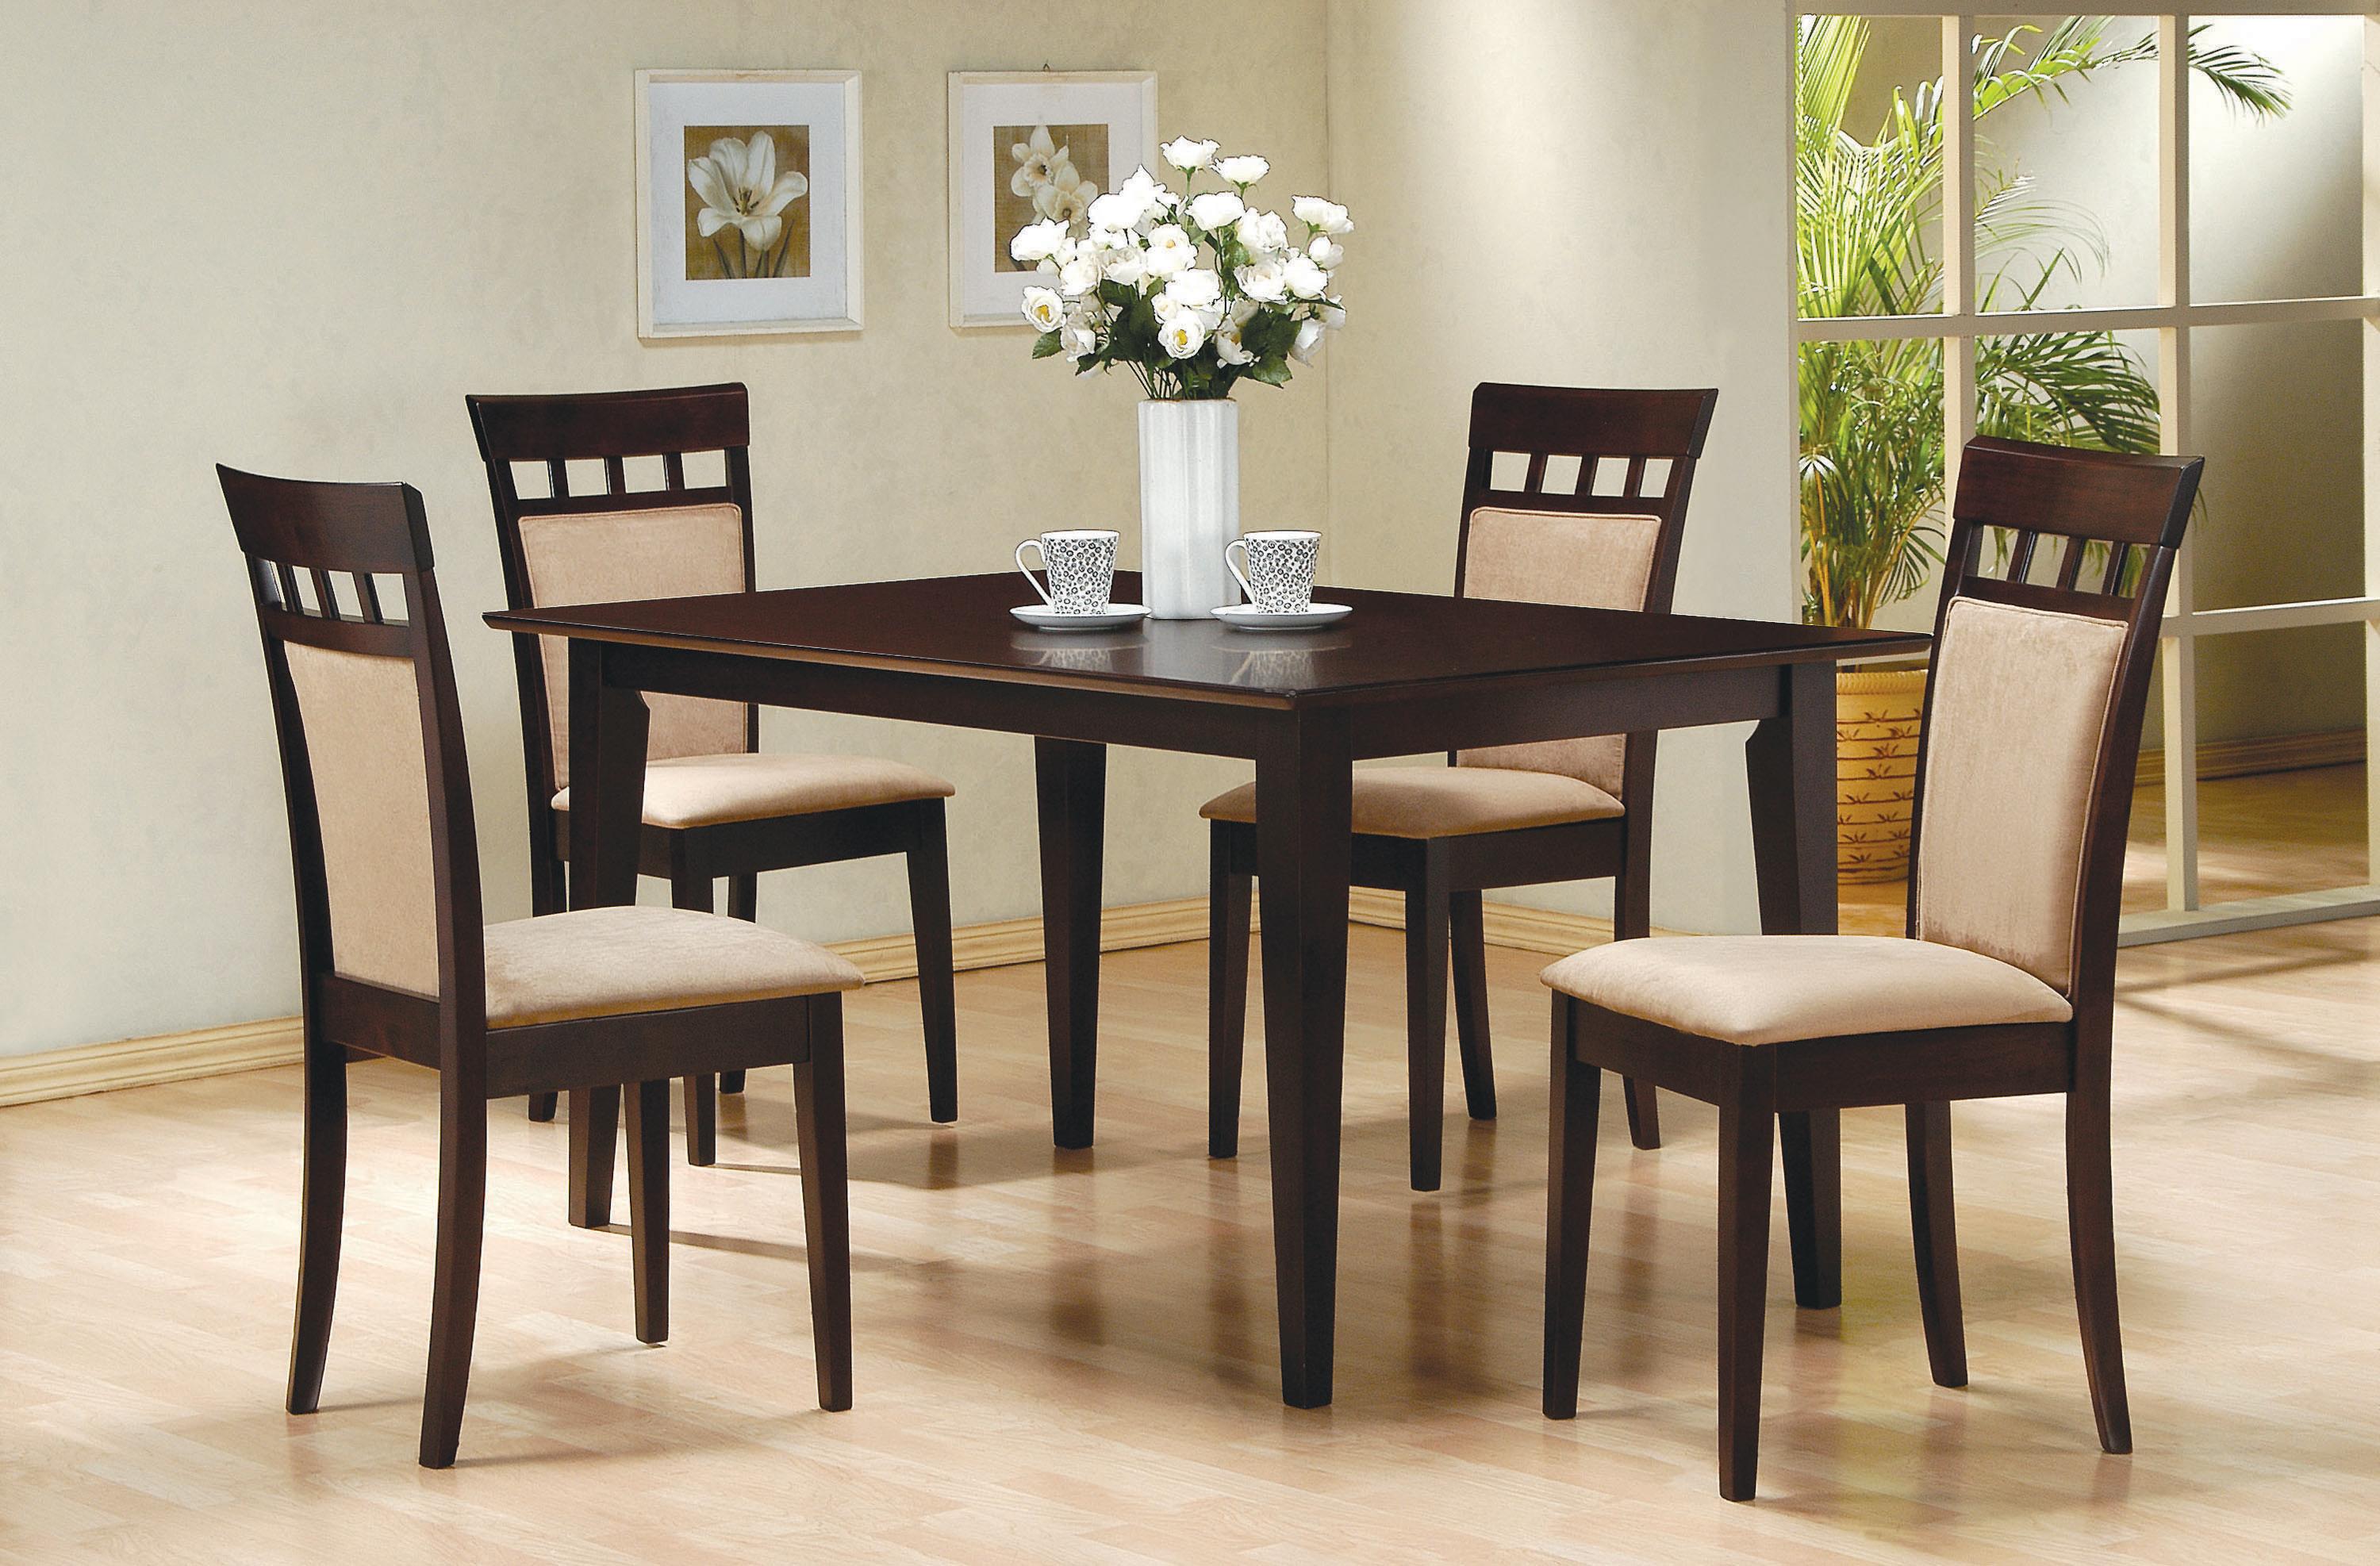 Transitional Dining Room Set 100771*73-S5 Gabriel 100771*73-S5 in Cappuccino Microfiber